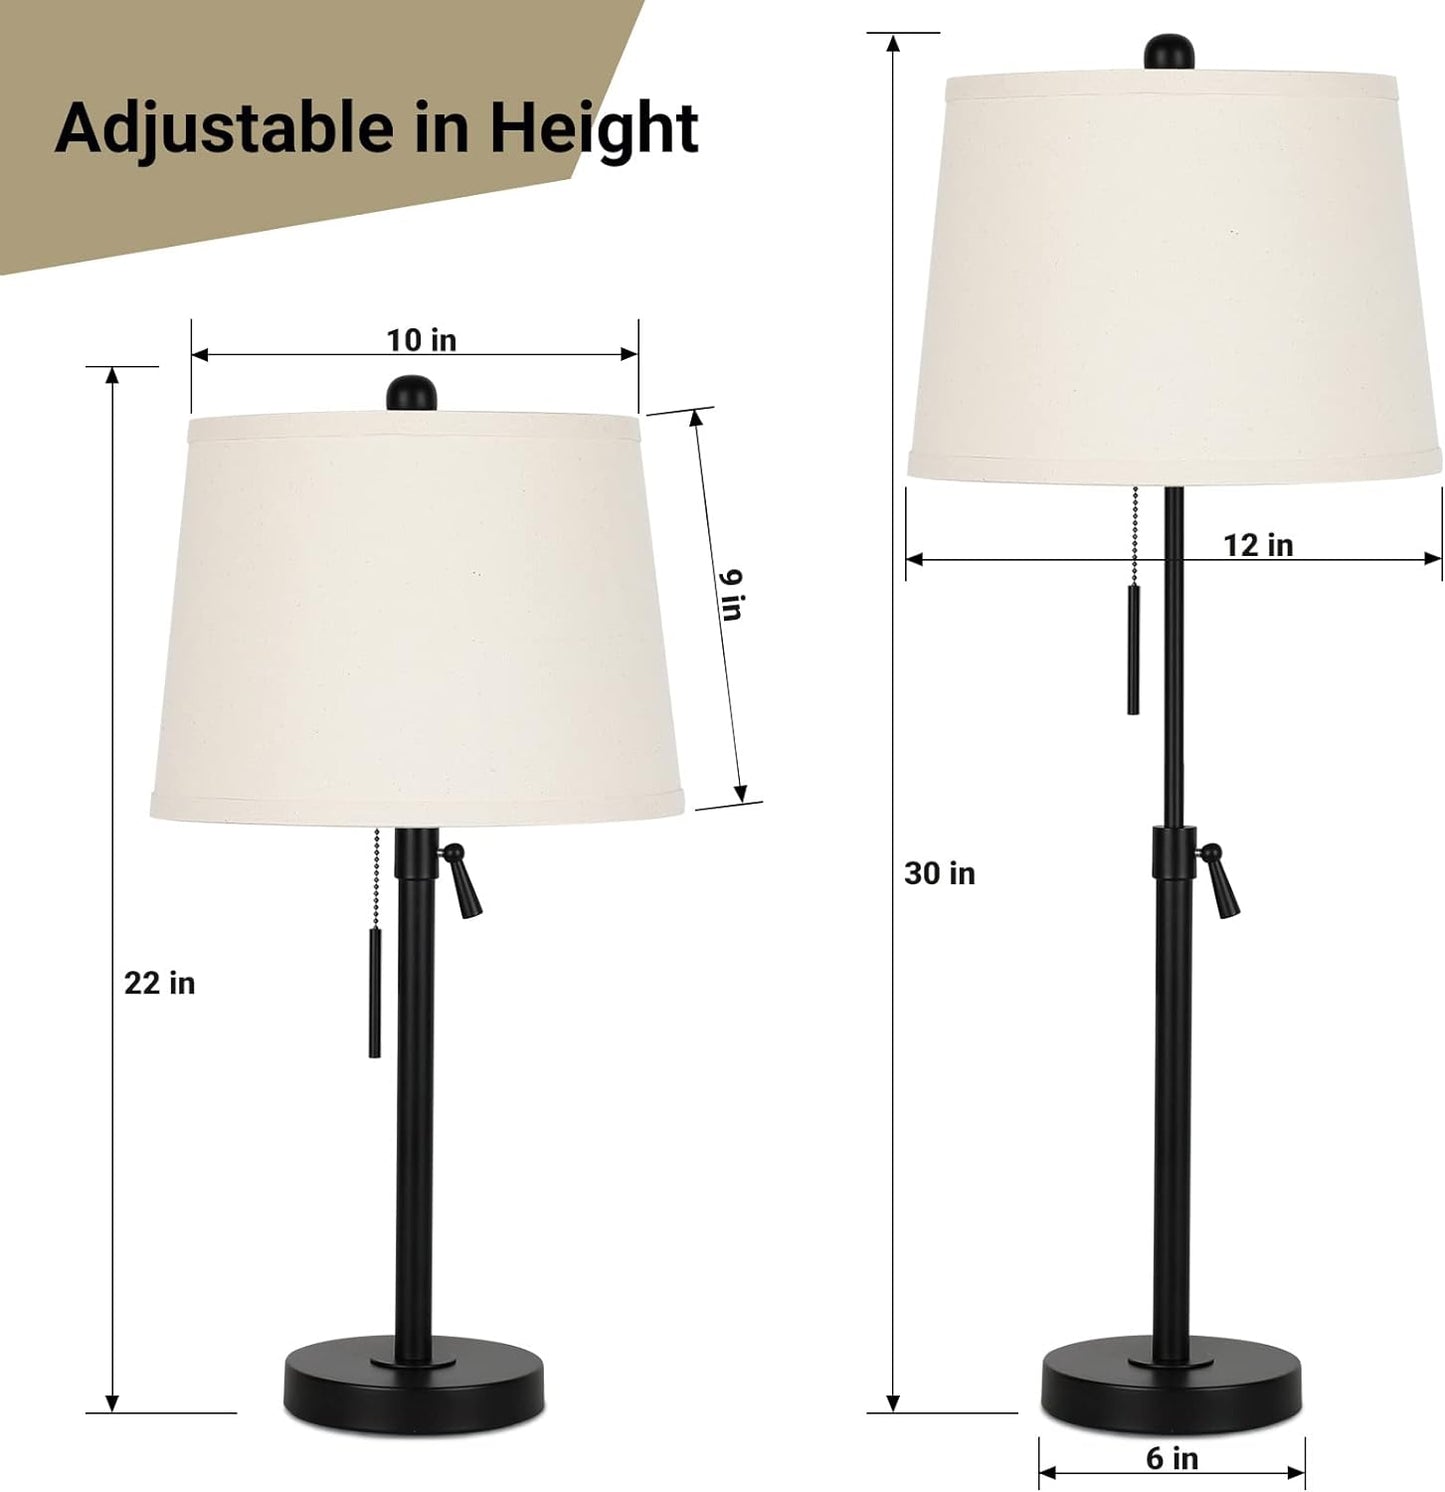 Bedside Table Lamps Set of 2: 22" to 30" Height Adjustable | 3-Way Dimmable Modern Nightstand Lamps with Fabric Lampshade, Pull Chain Lamps for Living Room Bedrooms (Bulbs Included)